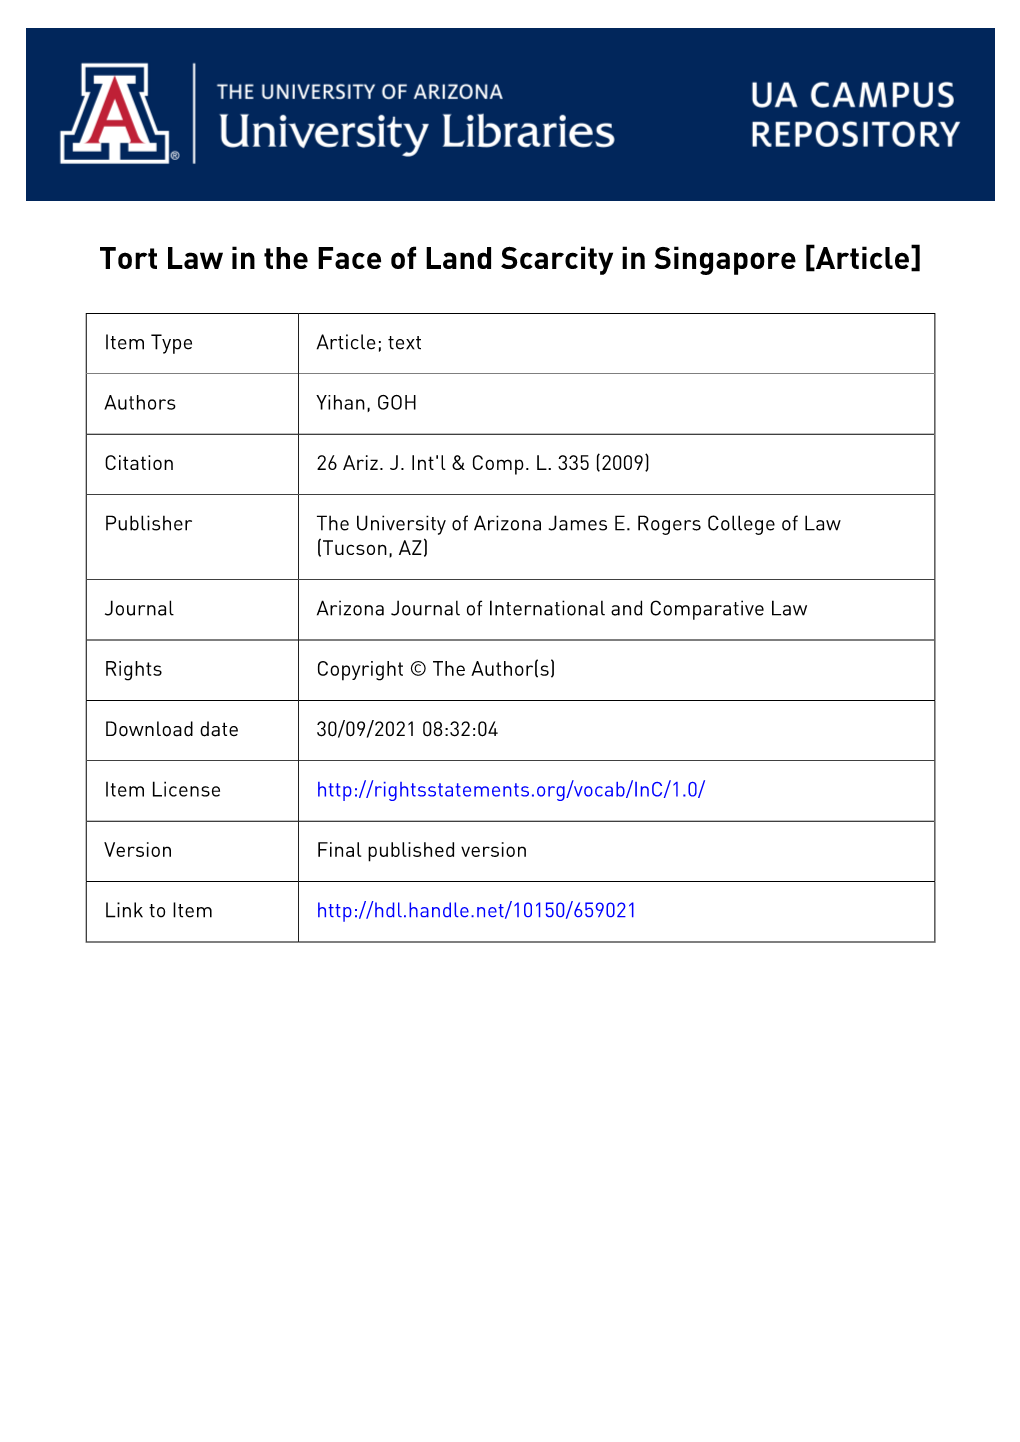 Tort Law in the Face of Land Scarcity in Singapore [Article]